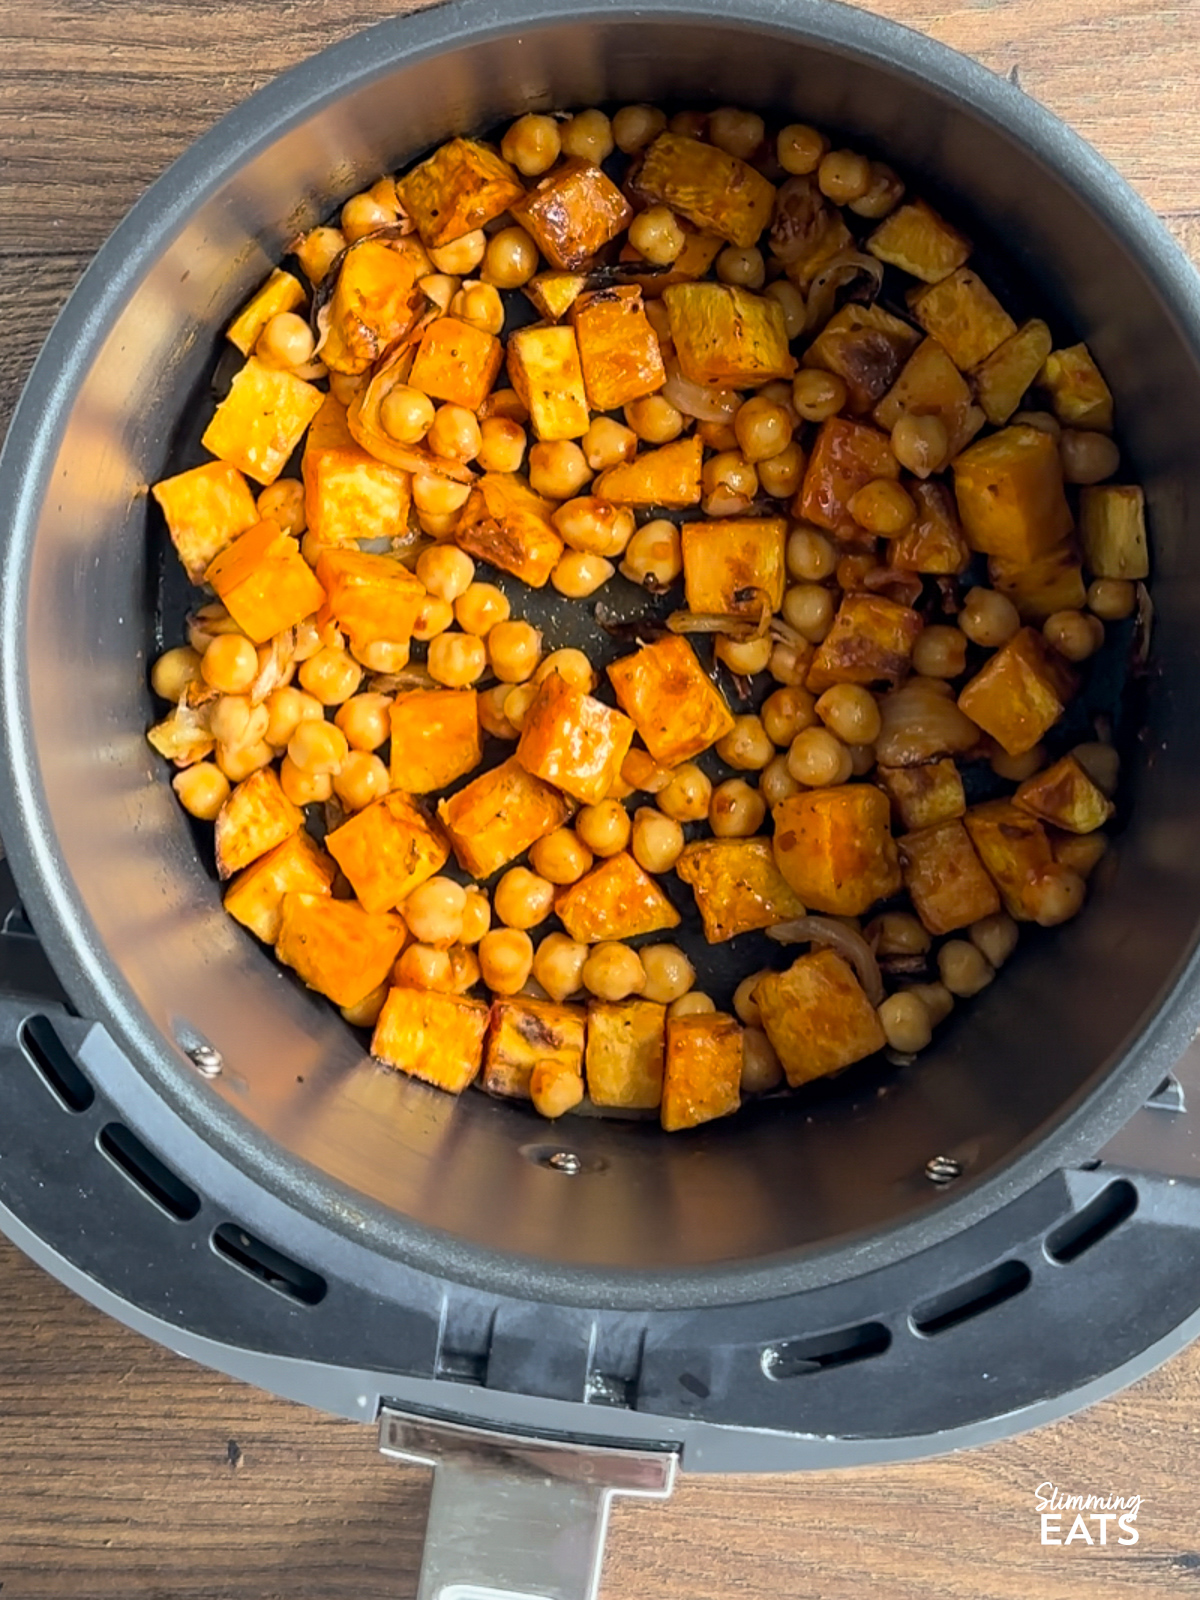 cooked sweet potato and onion in air fryer basket with harissa coated chickpeas